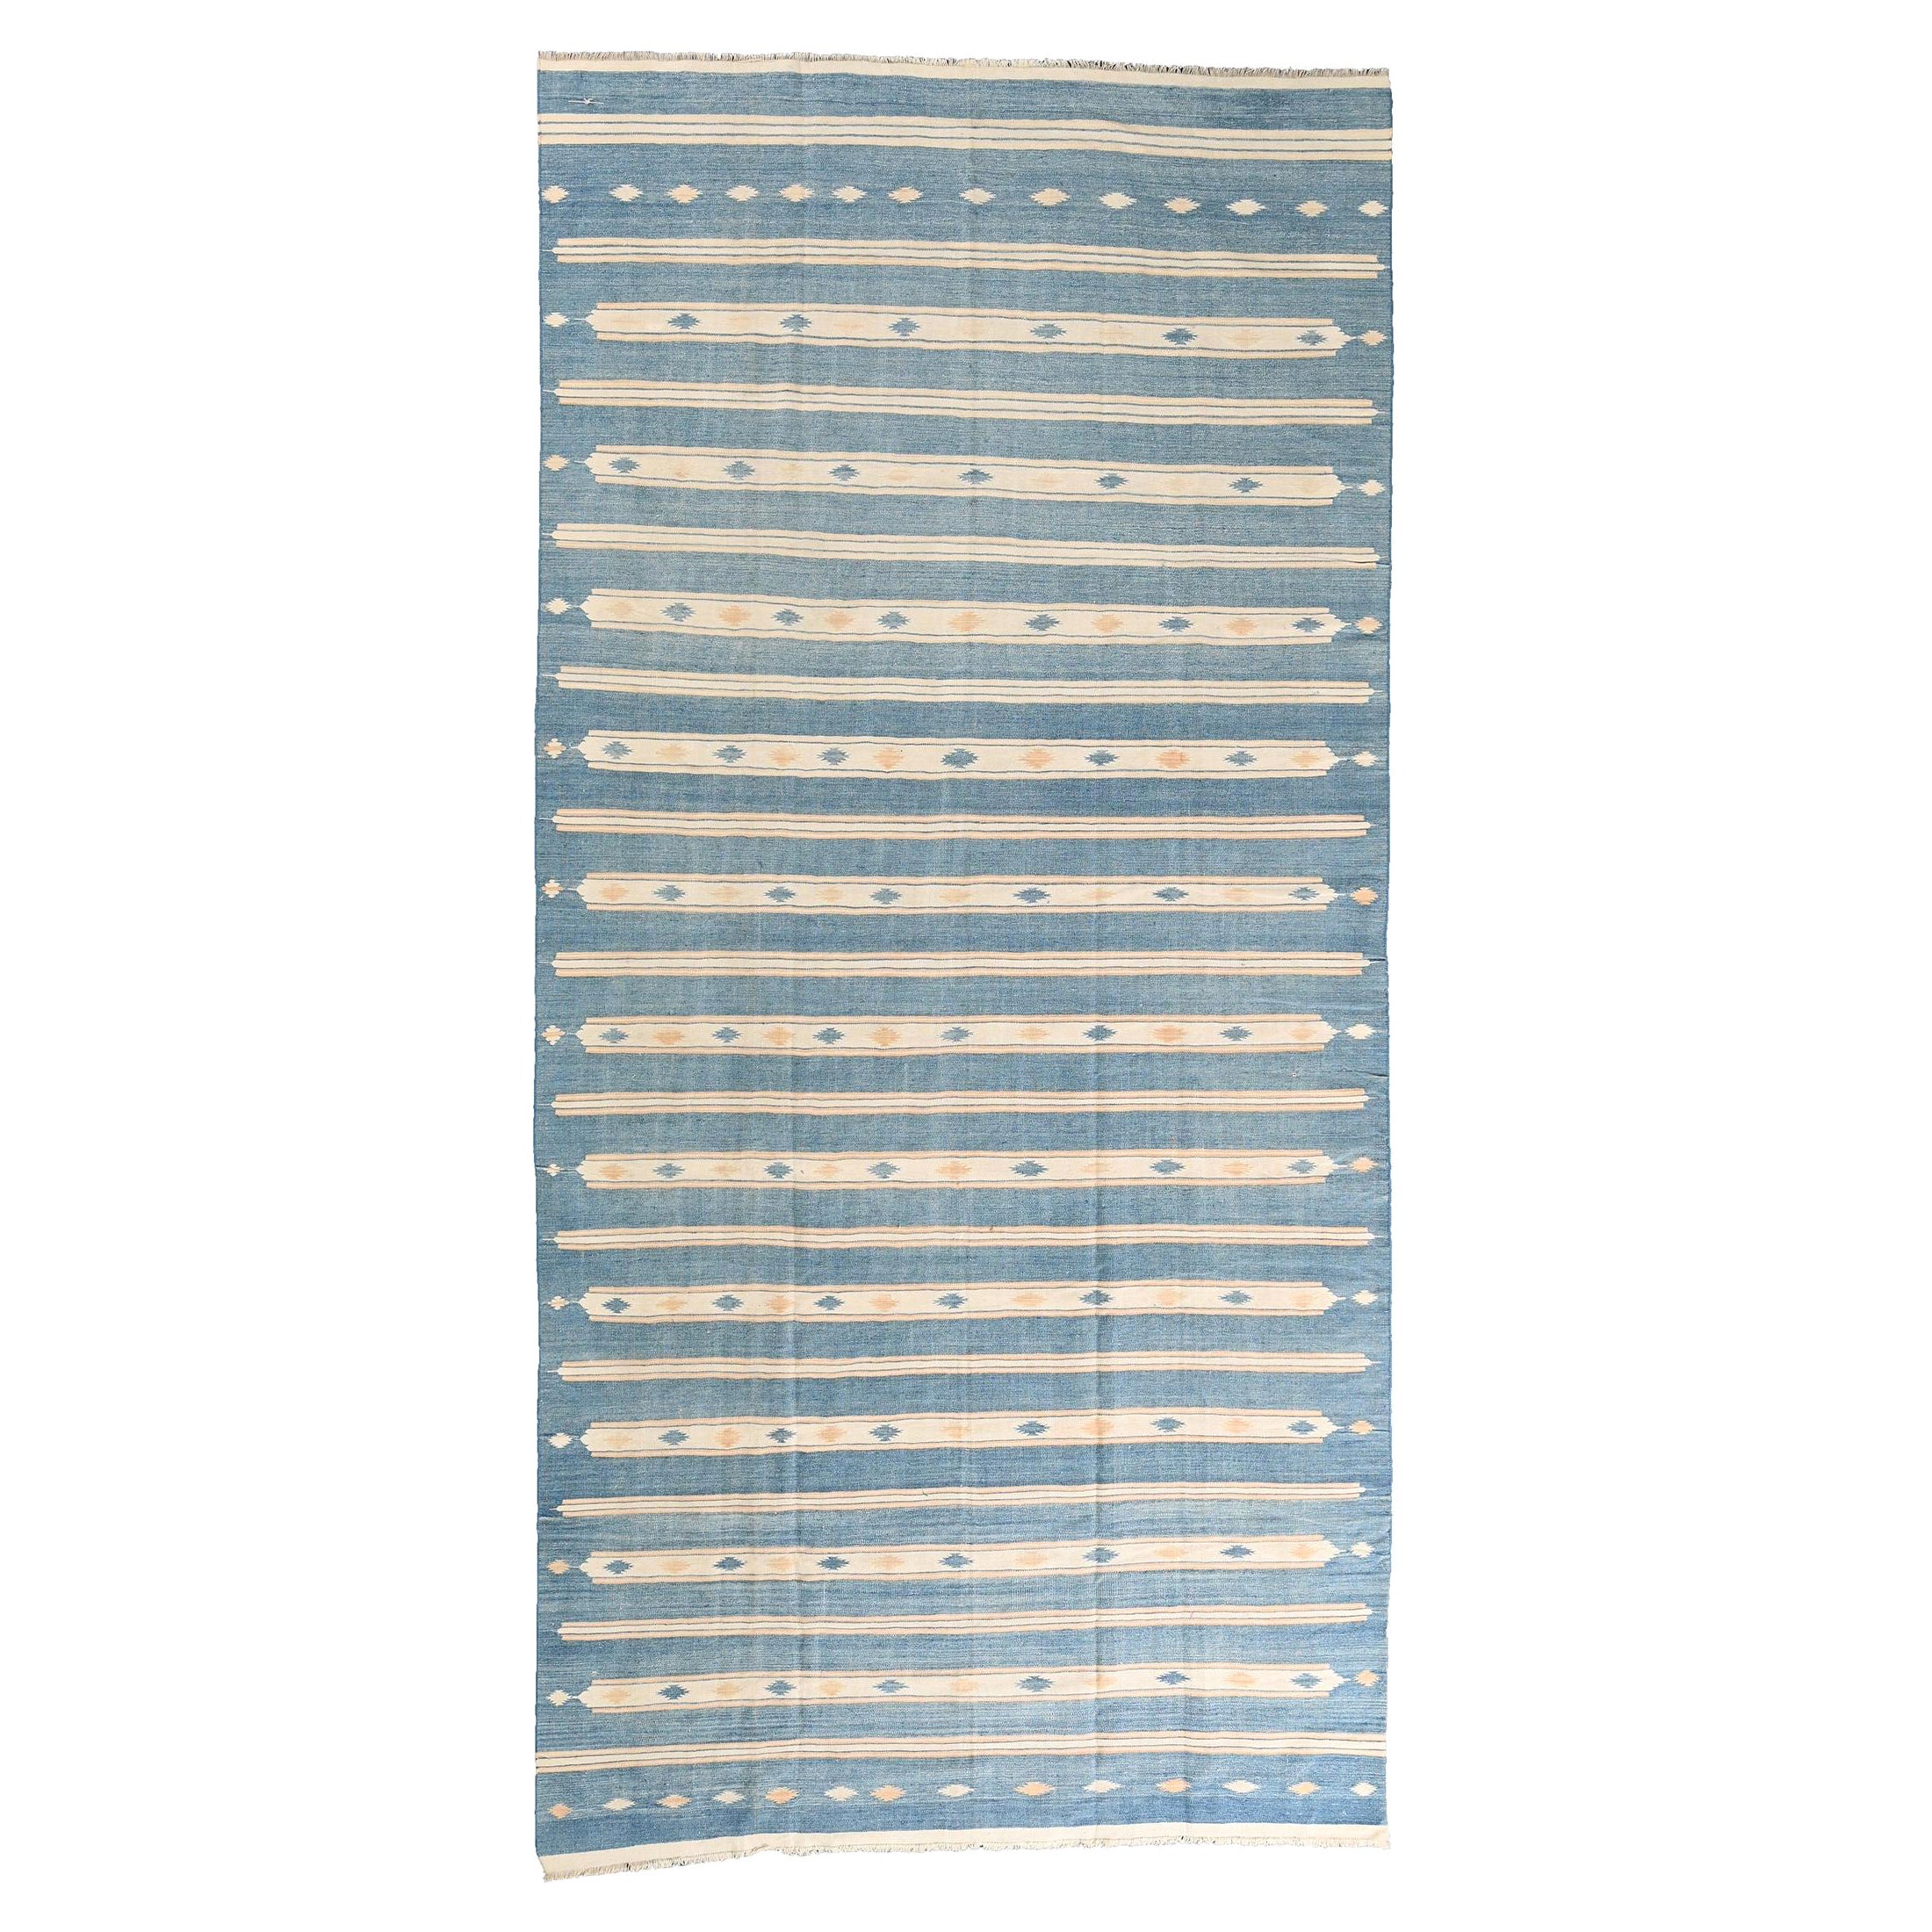 Vintage Dhurrie Flat Weave in Blue and Off-White Stripes by Rug & Kilim